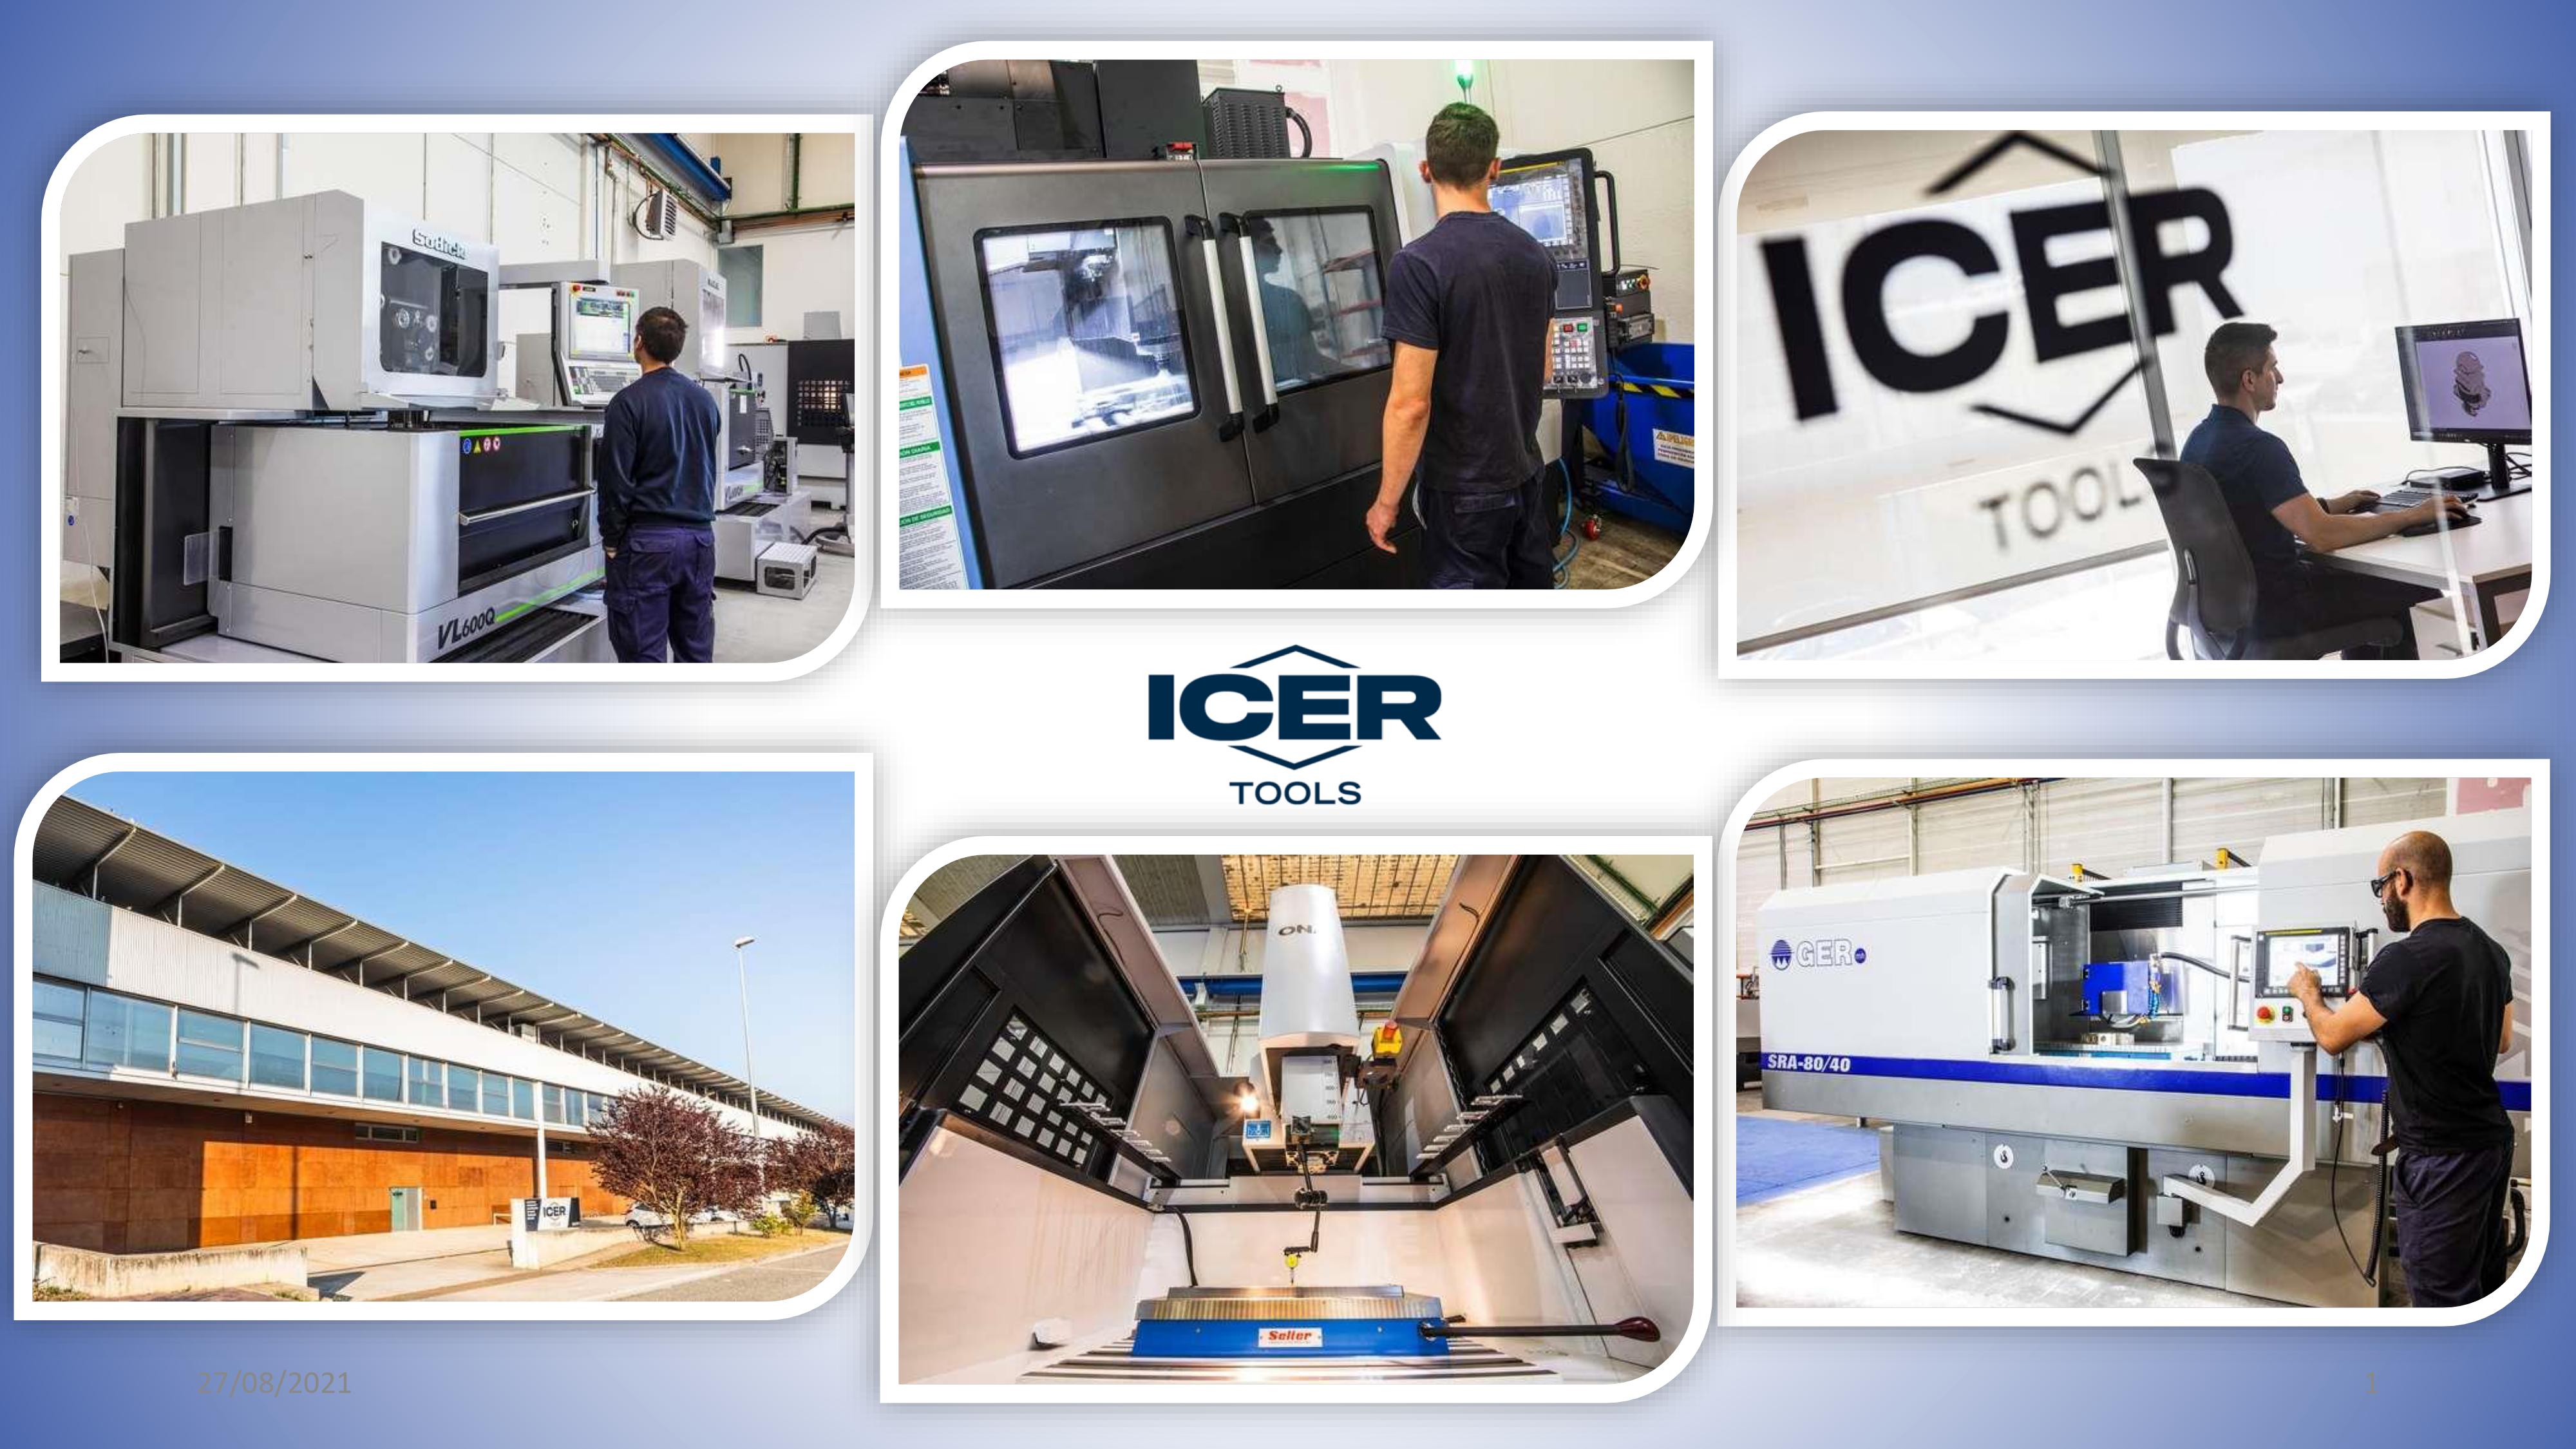 ICER TOOLS